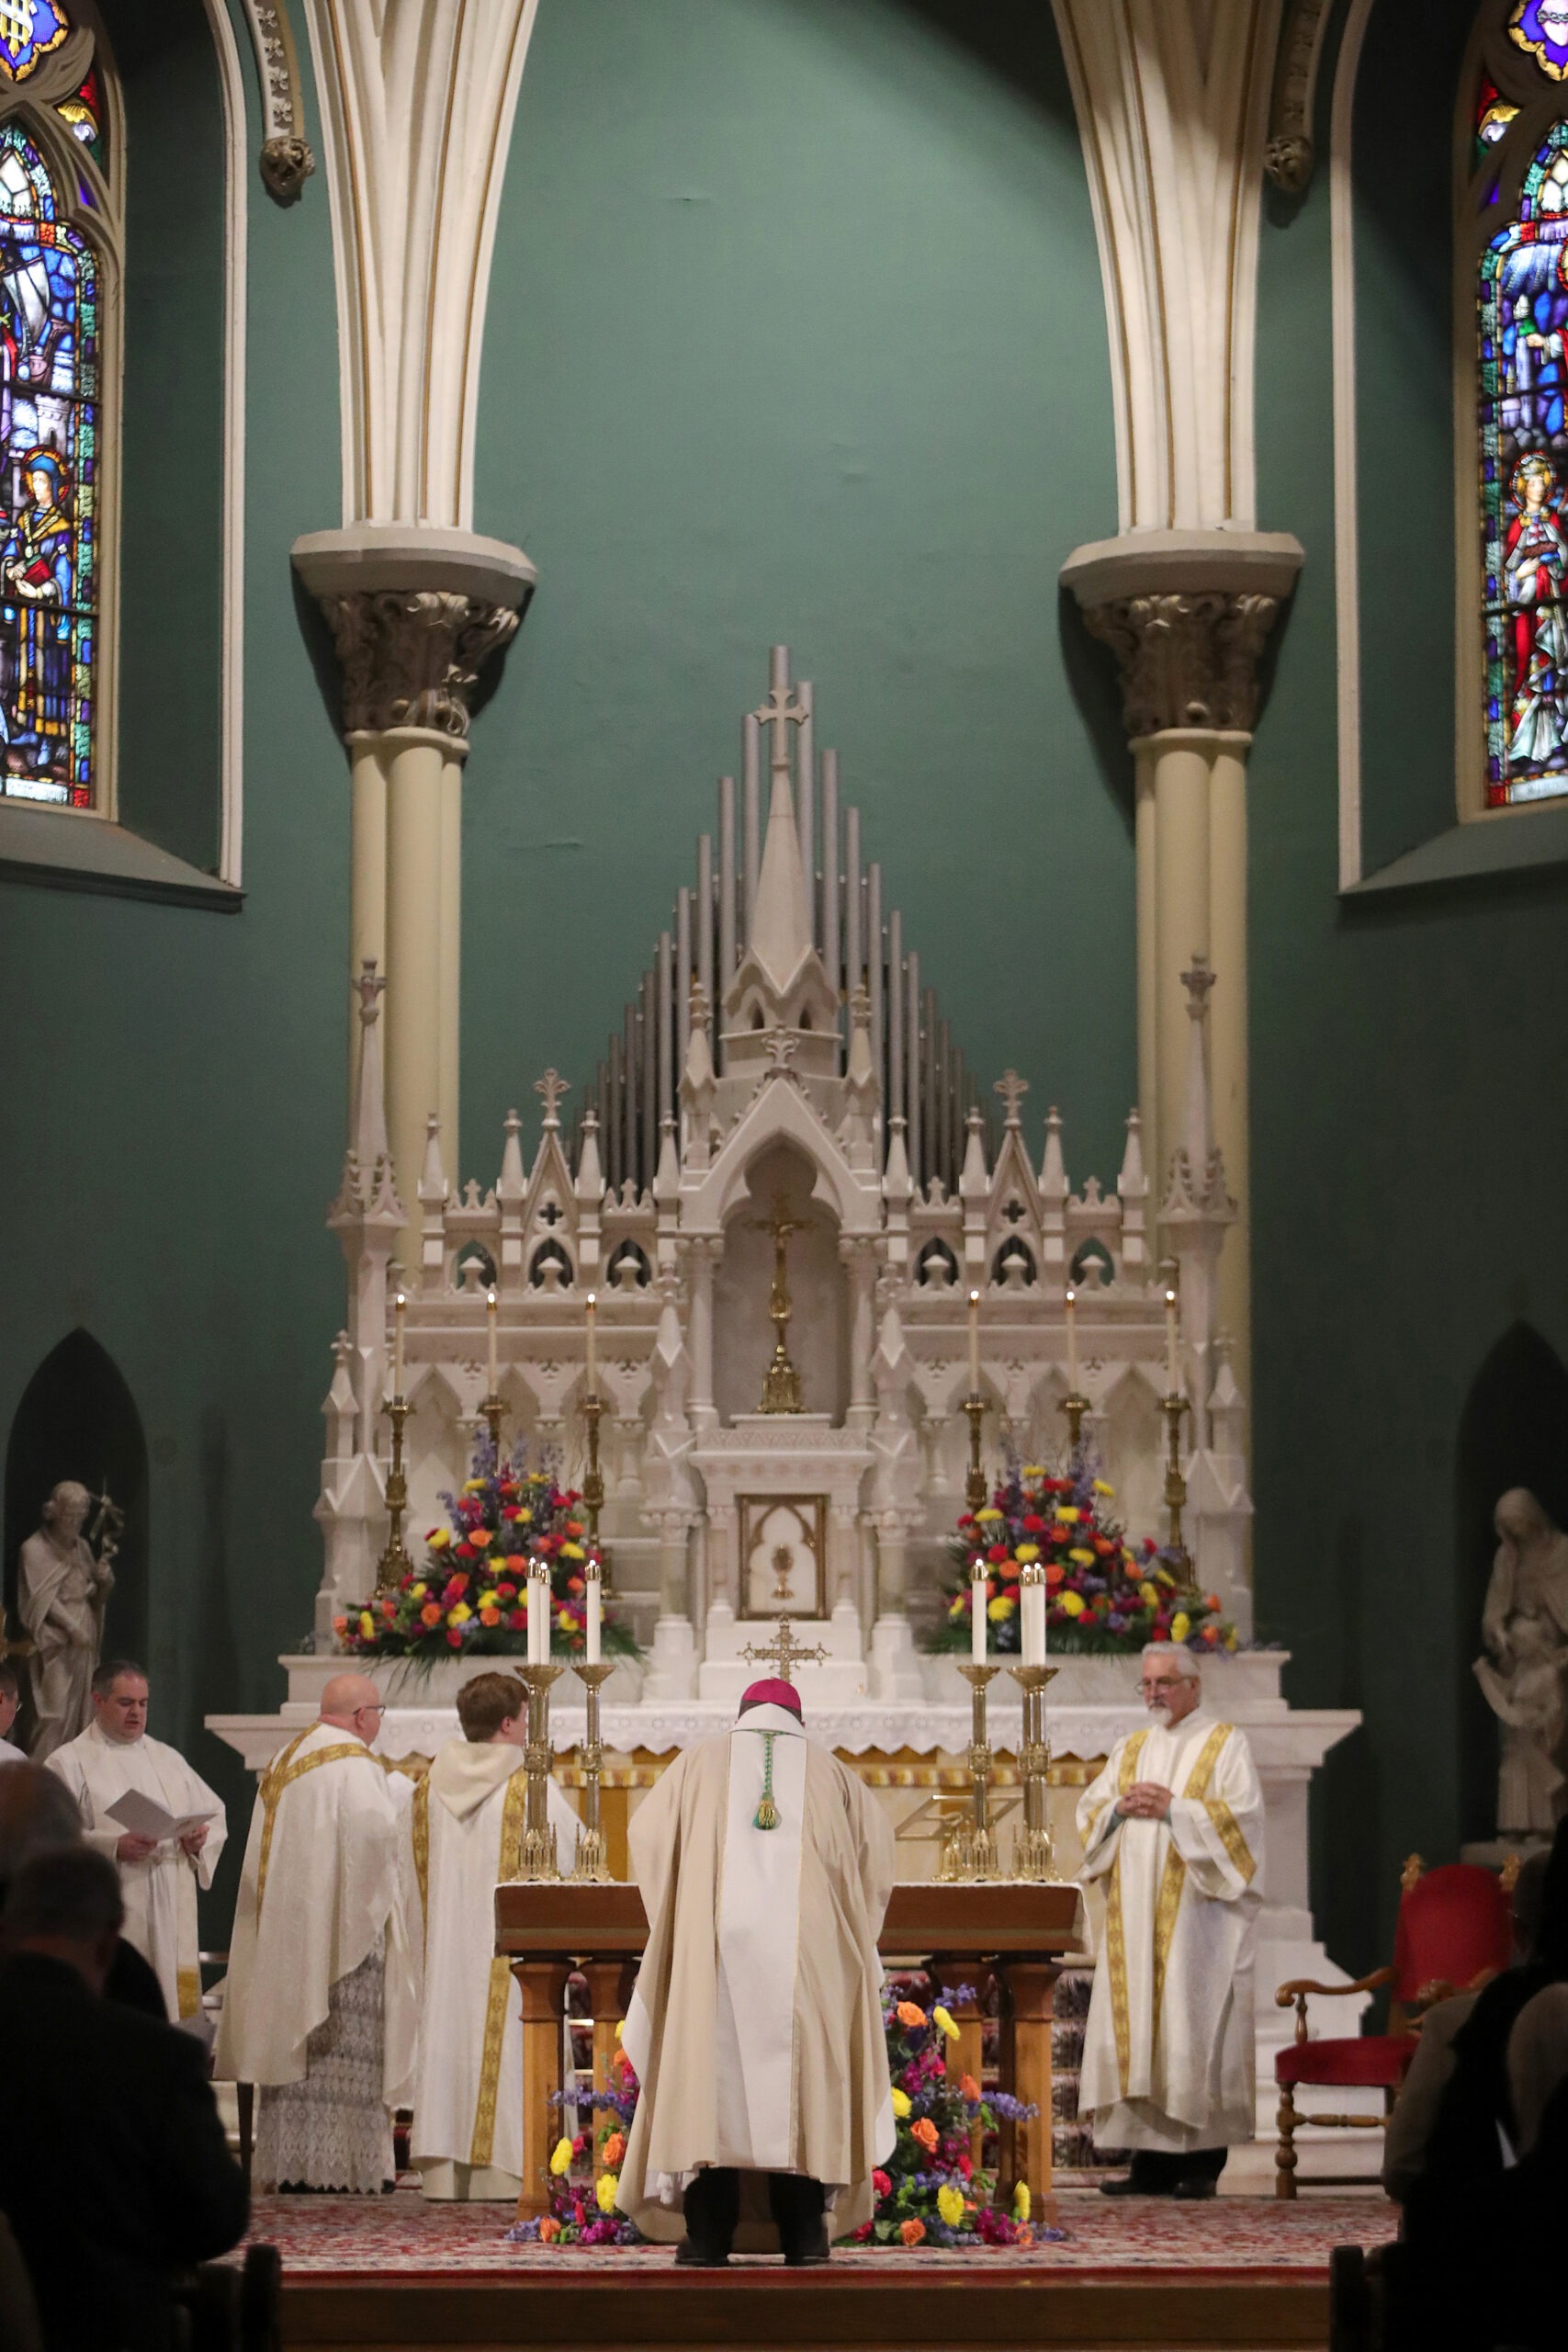 Bishop Bonnar bows in front of the altar at the basilica.